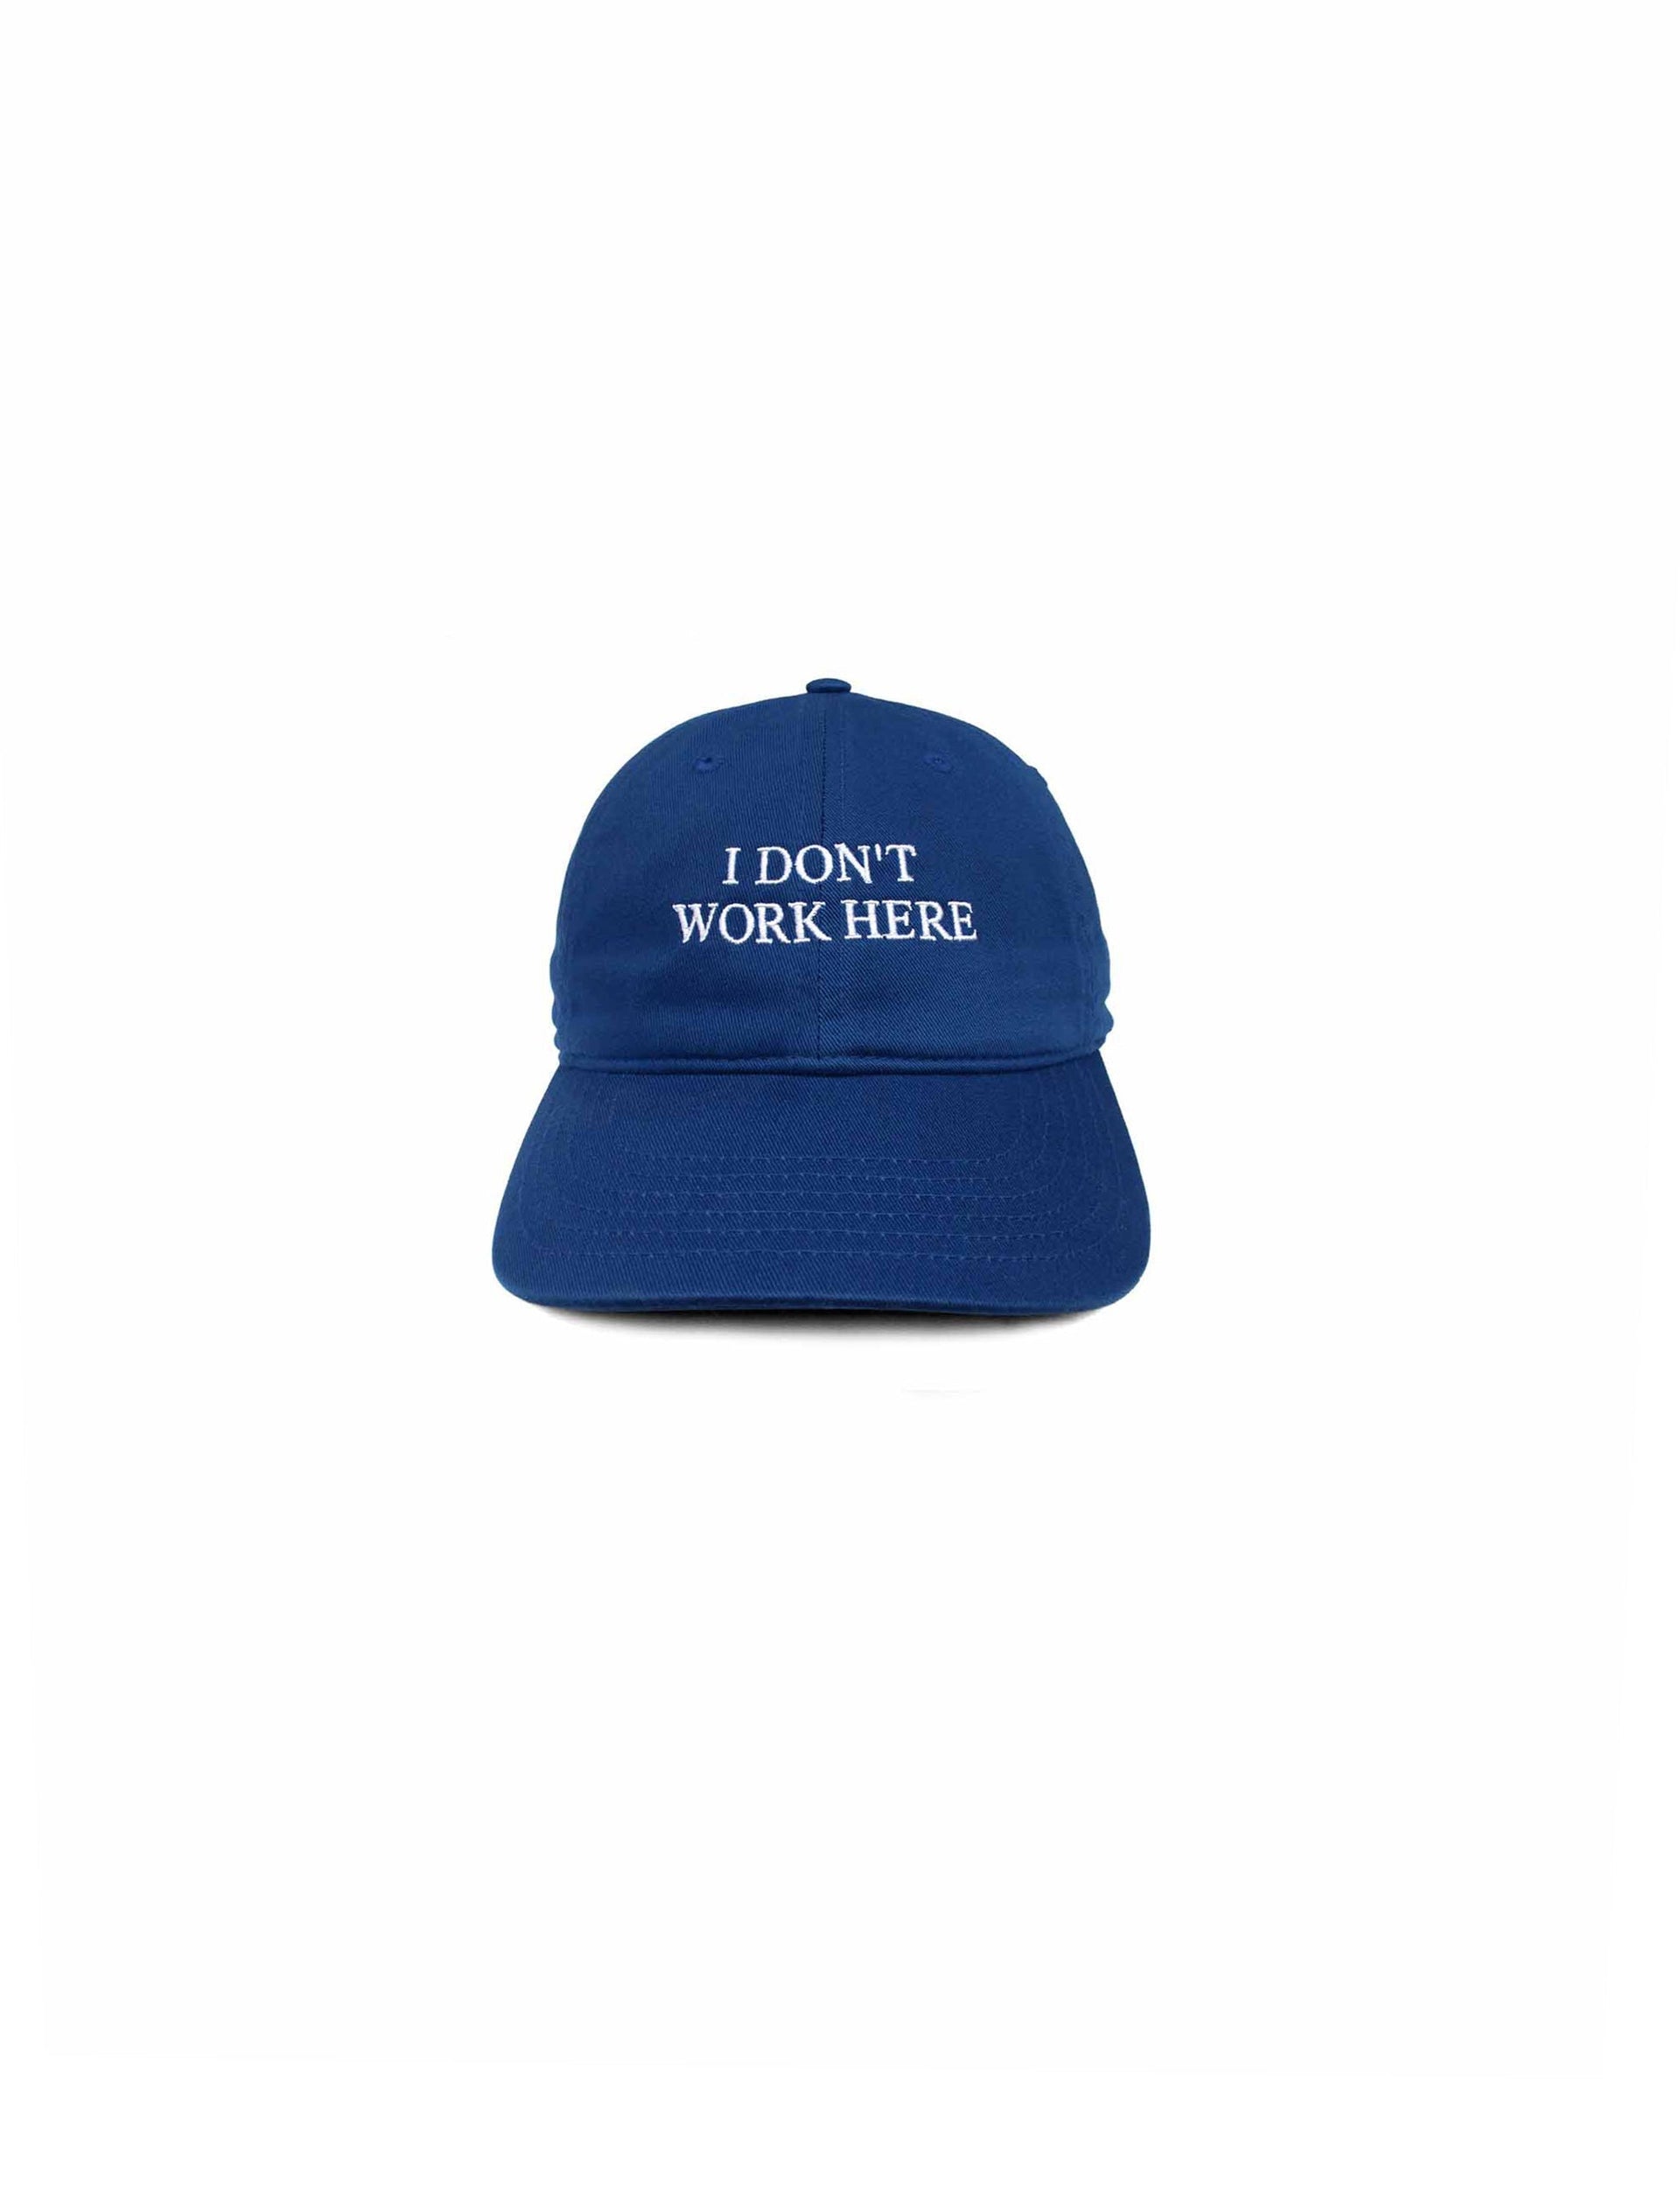 IDEA SORRY I DON'T WORK HERE ROYAL BLUE HAT